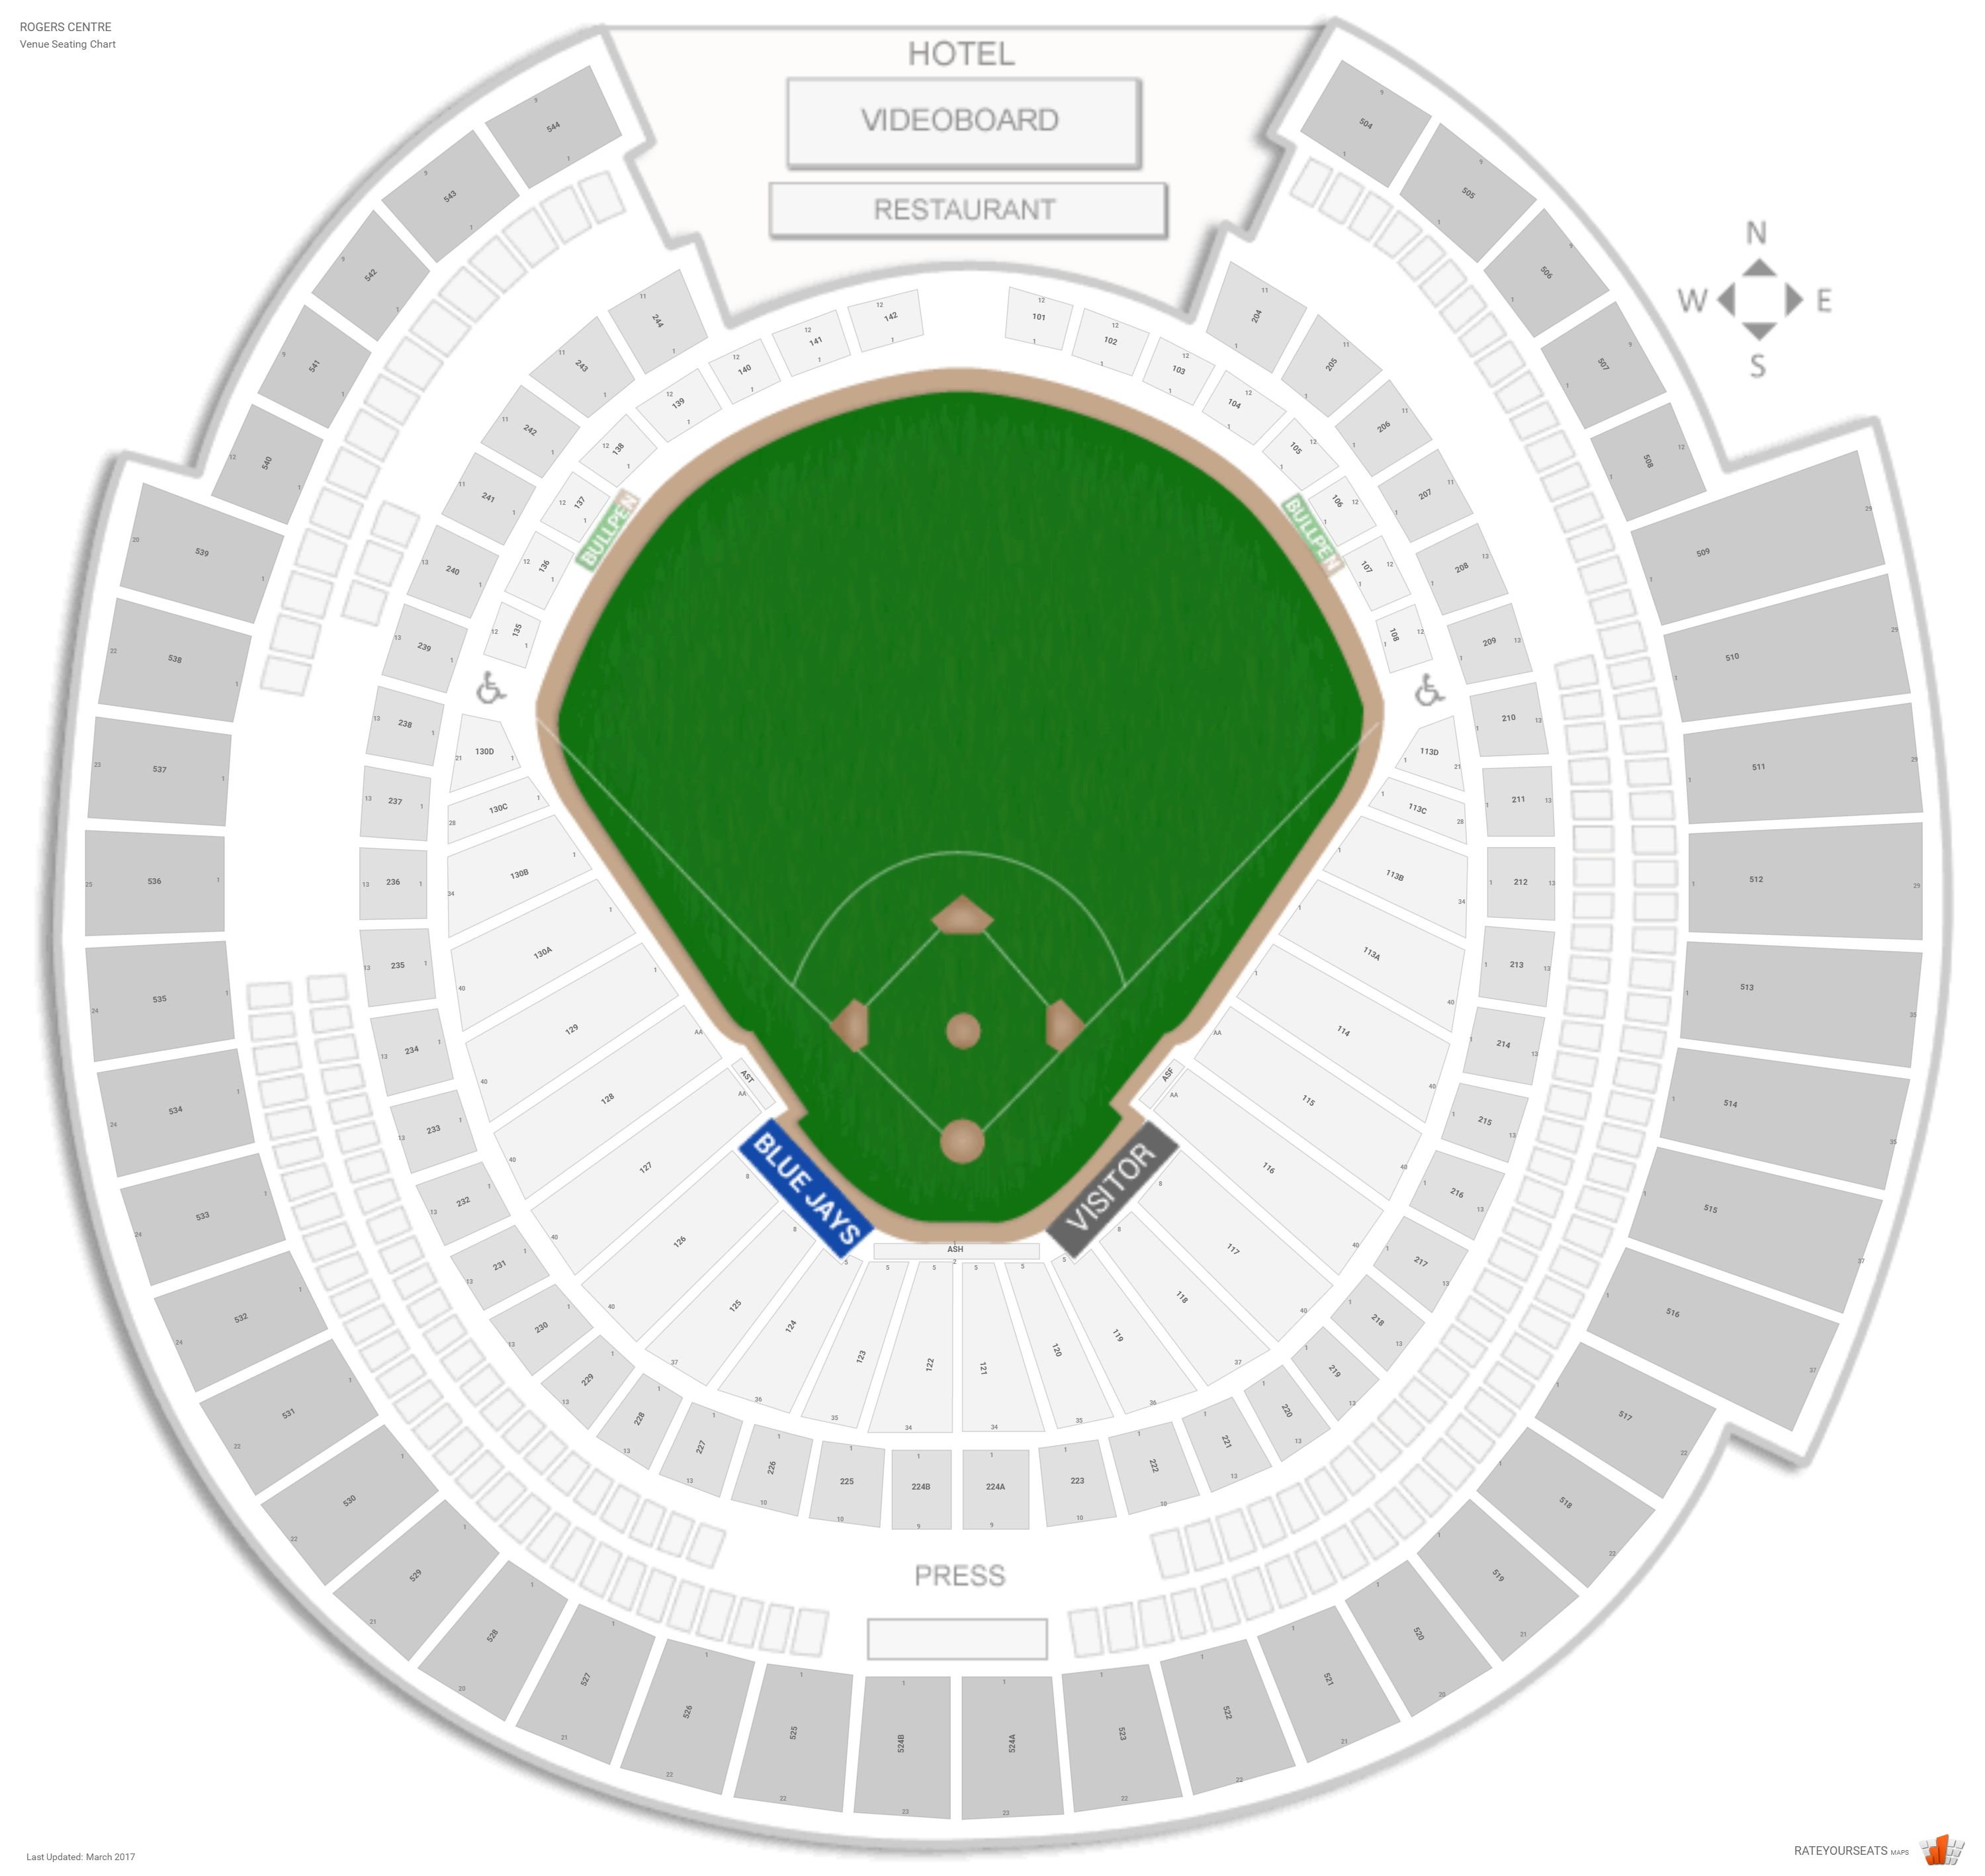 Rogers Centre Seating Chart With Row Numbers